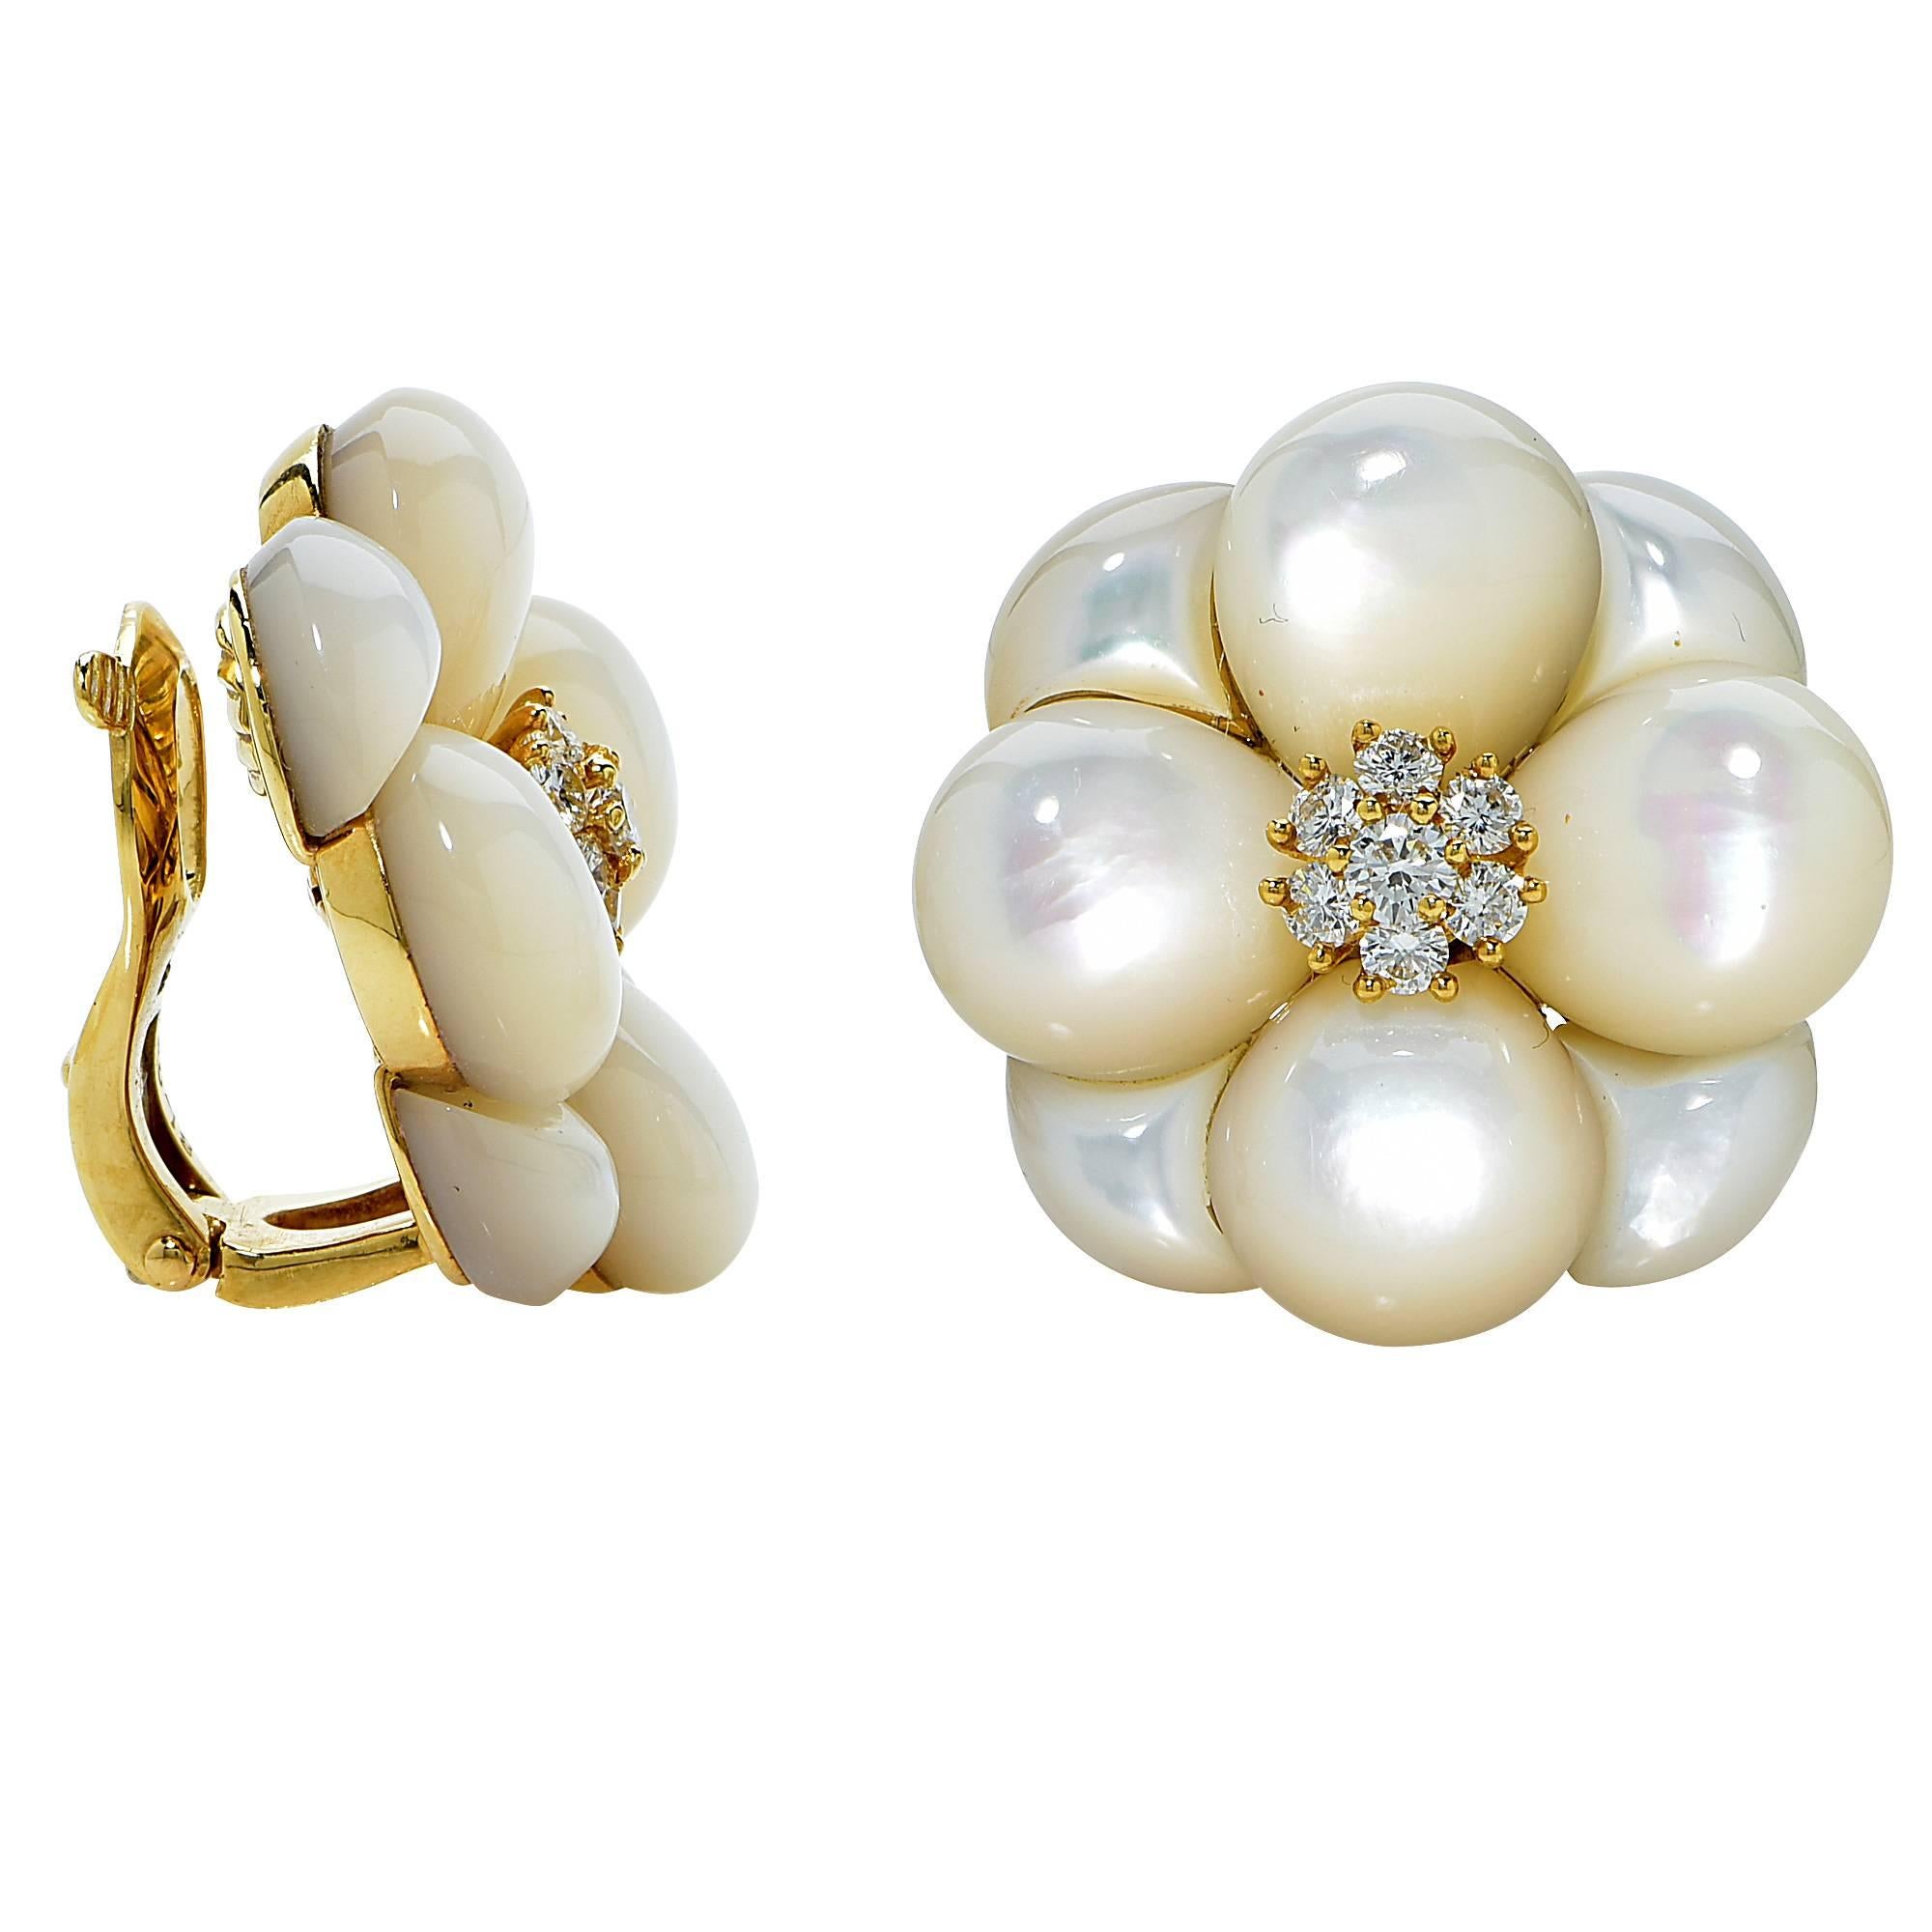 18k yellow gold Van Cleef and Arpel earrings featuring cabochon mother of pearl and .80cts of round brilliant cut diamonds, F color, VS clarity.

Metal weight: 25.65 grams

These mother of pearl and diamond earrings are accompanied by a retail